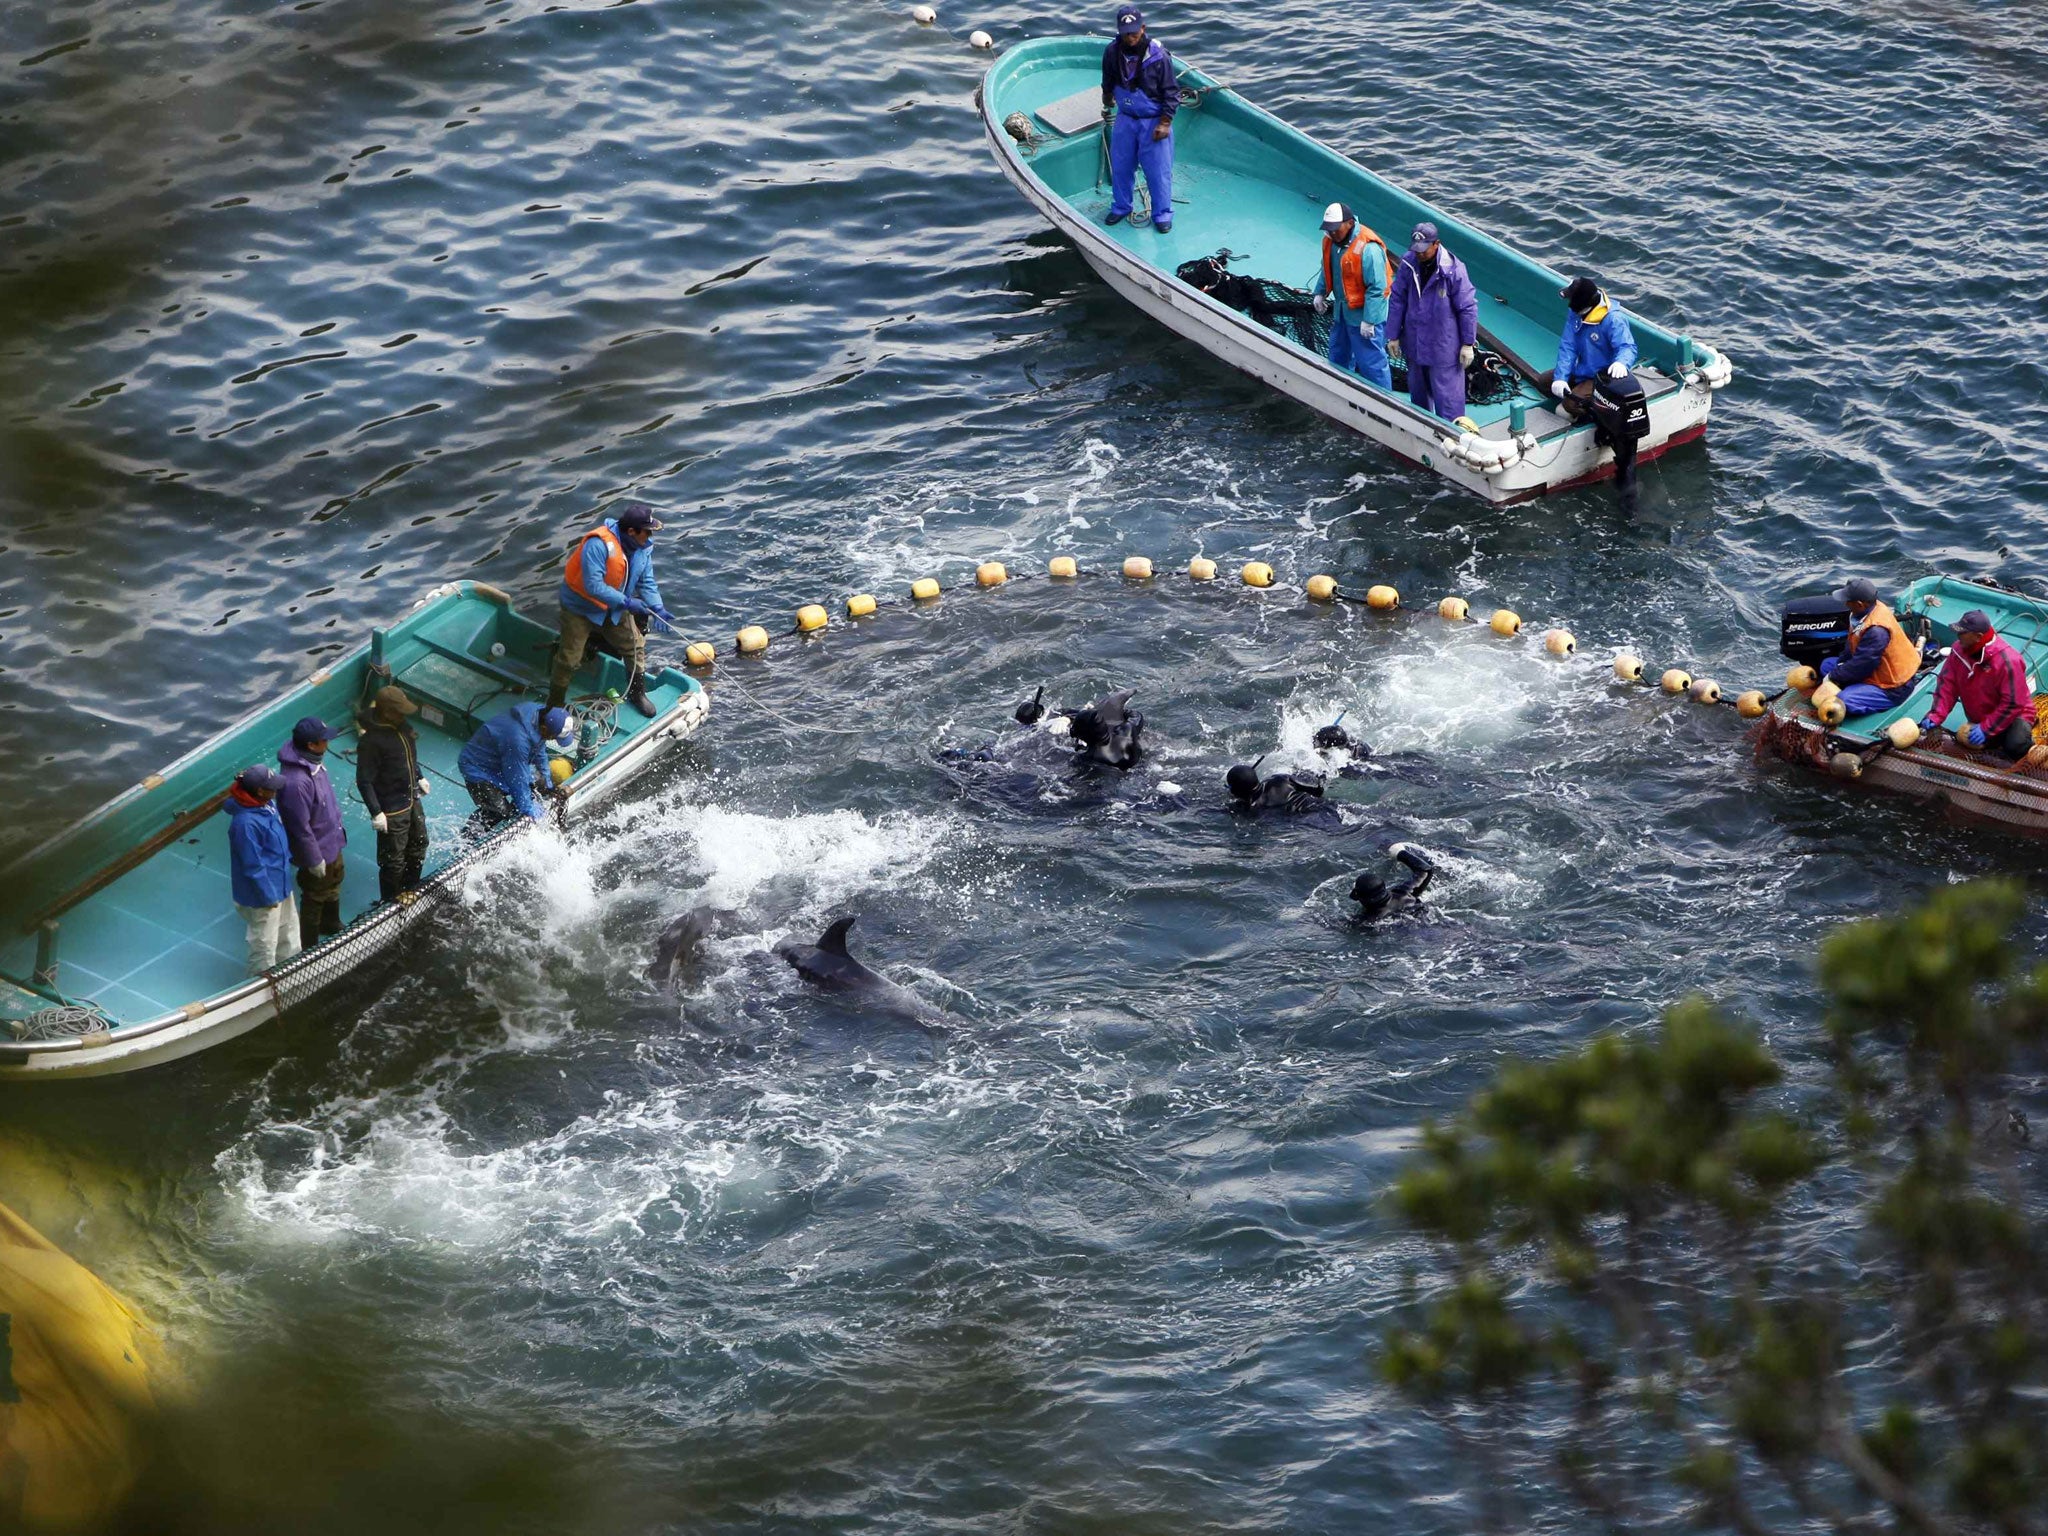 Fishermen in wetsuits hunt dolphins at a cove in Taiji earlier this year